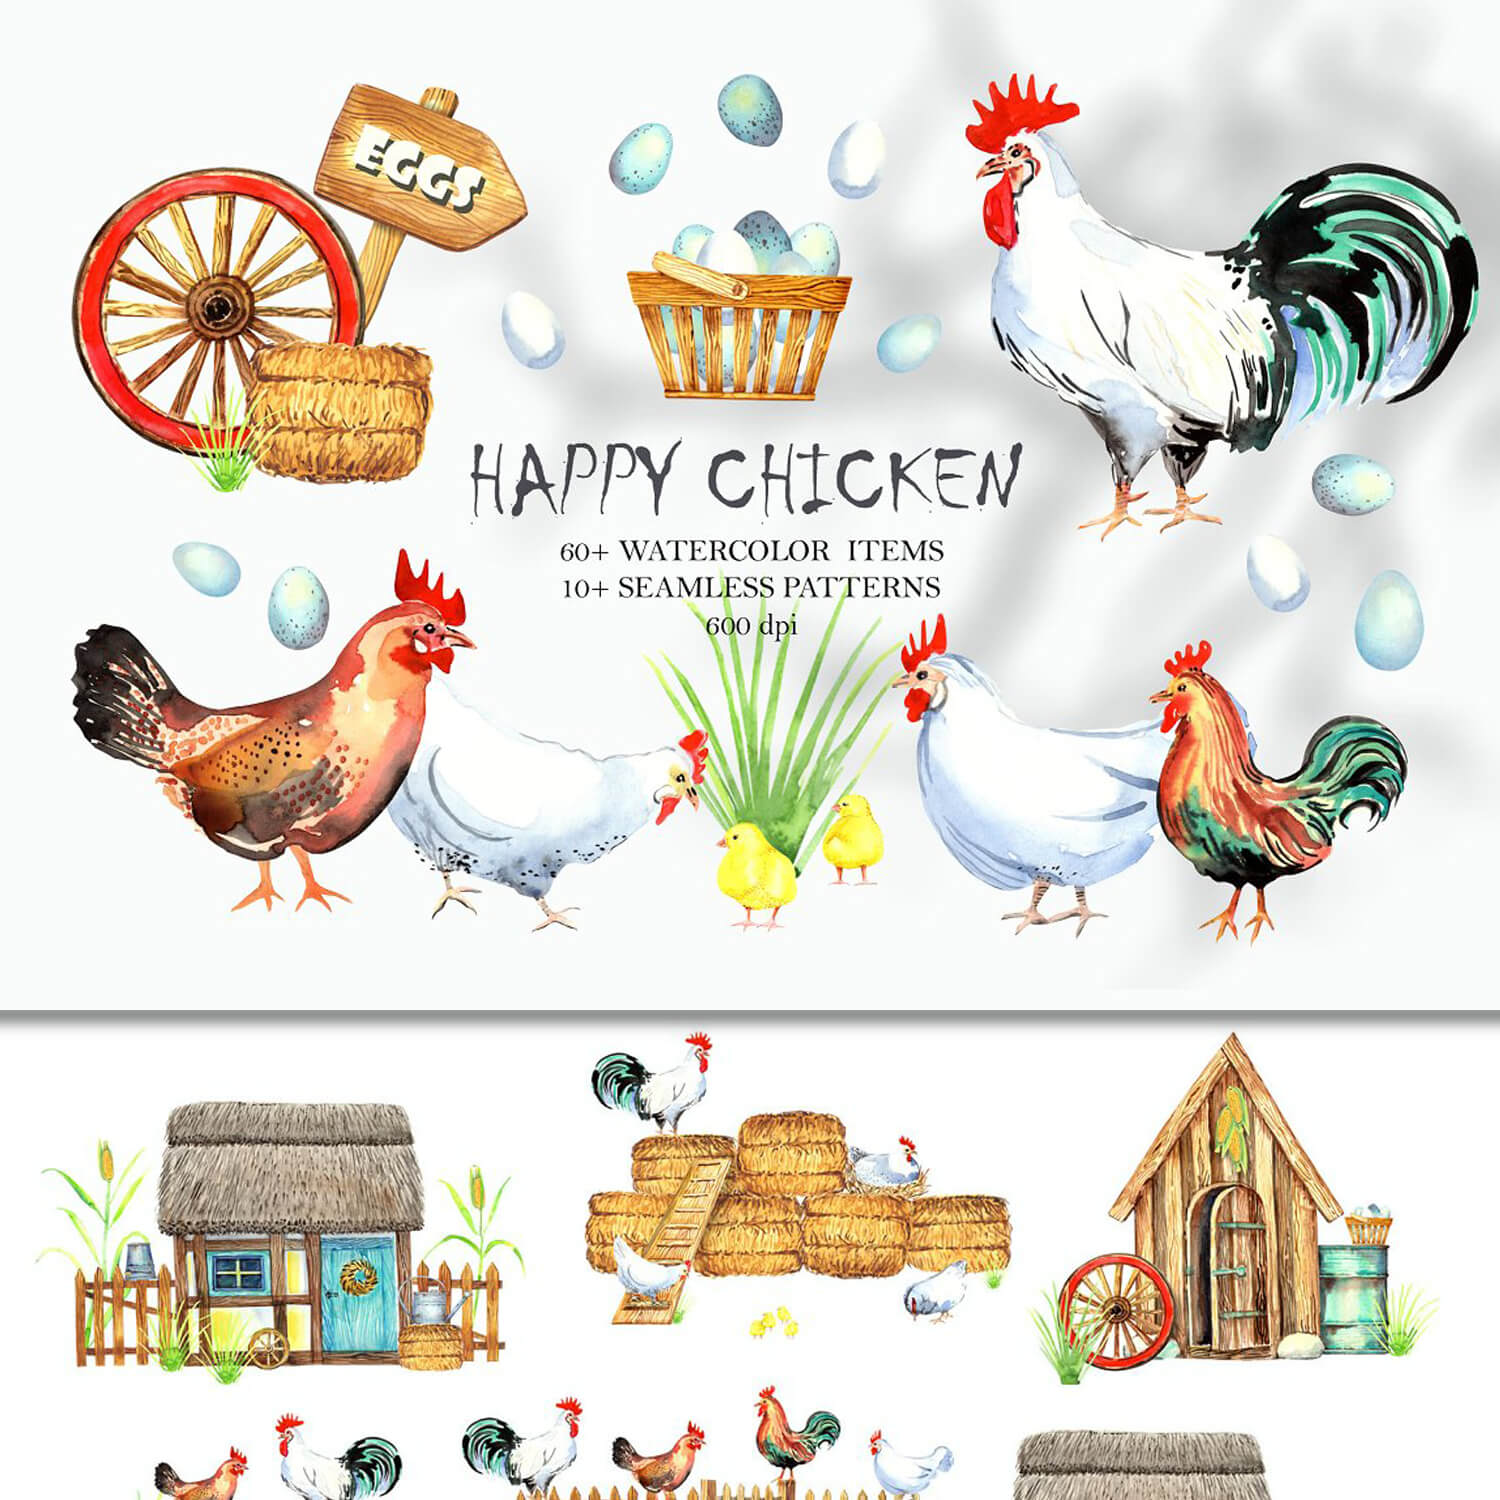 Compositions of rural life depicting happy chickens.